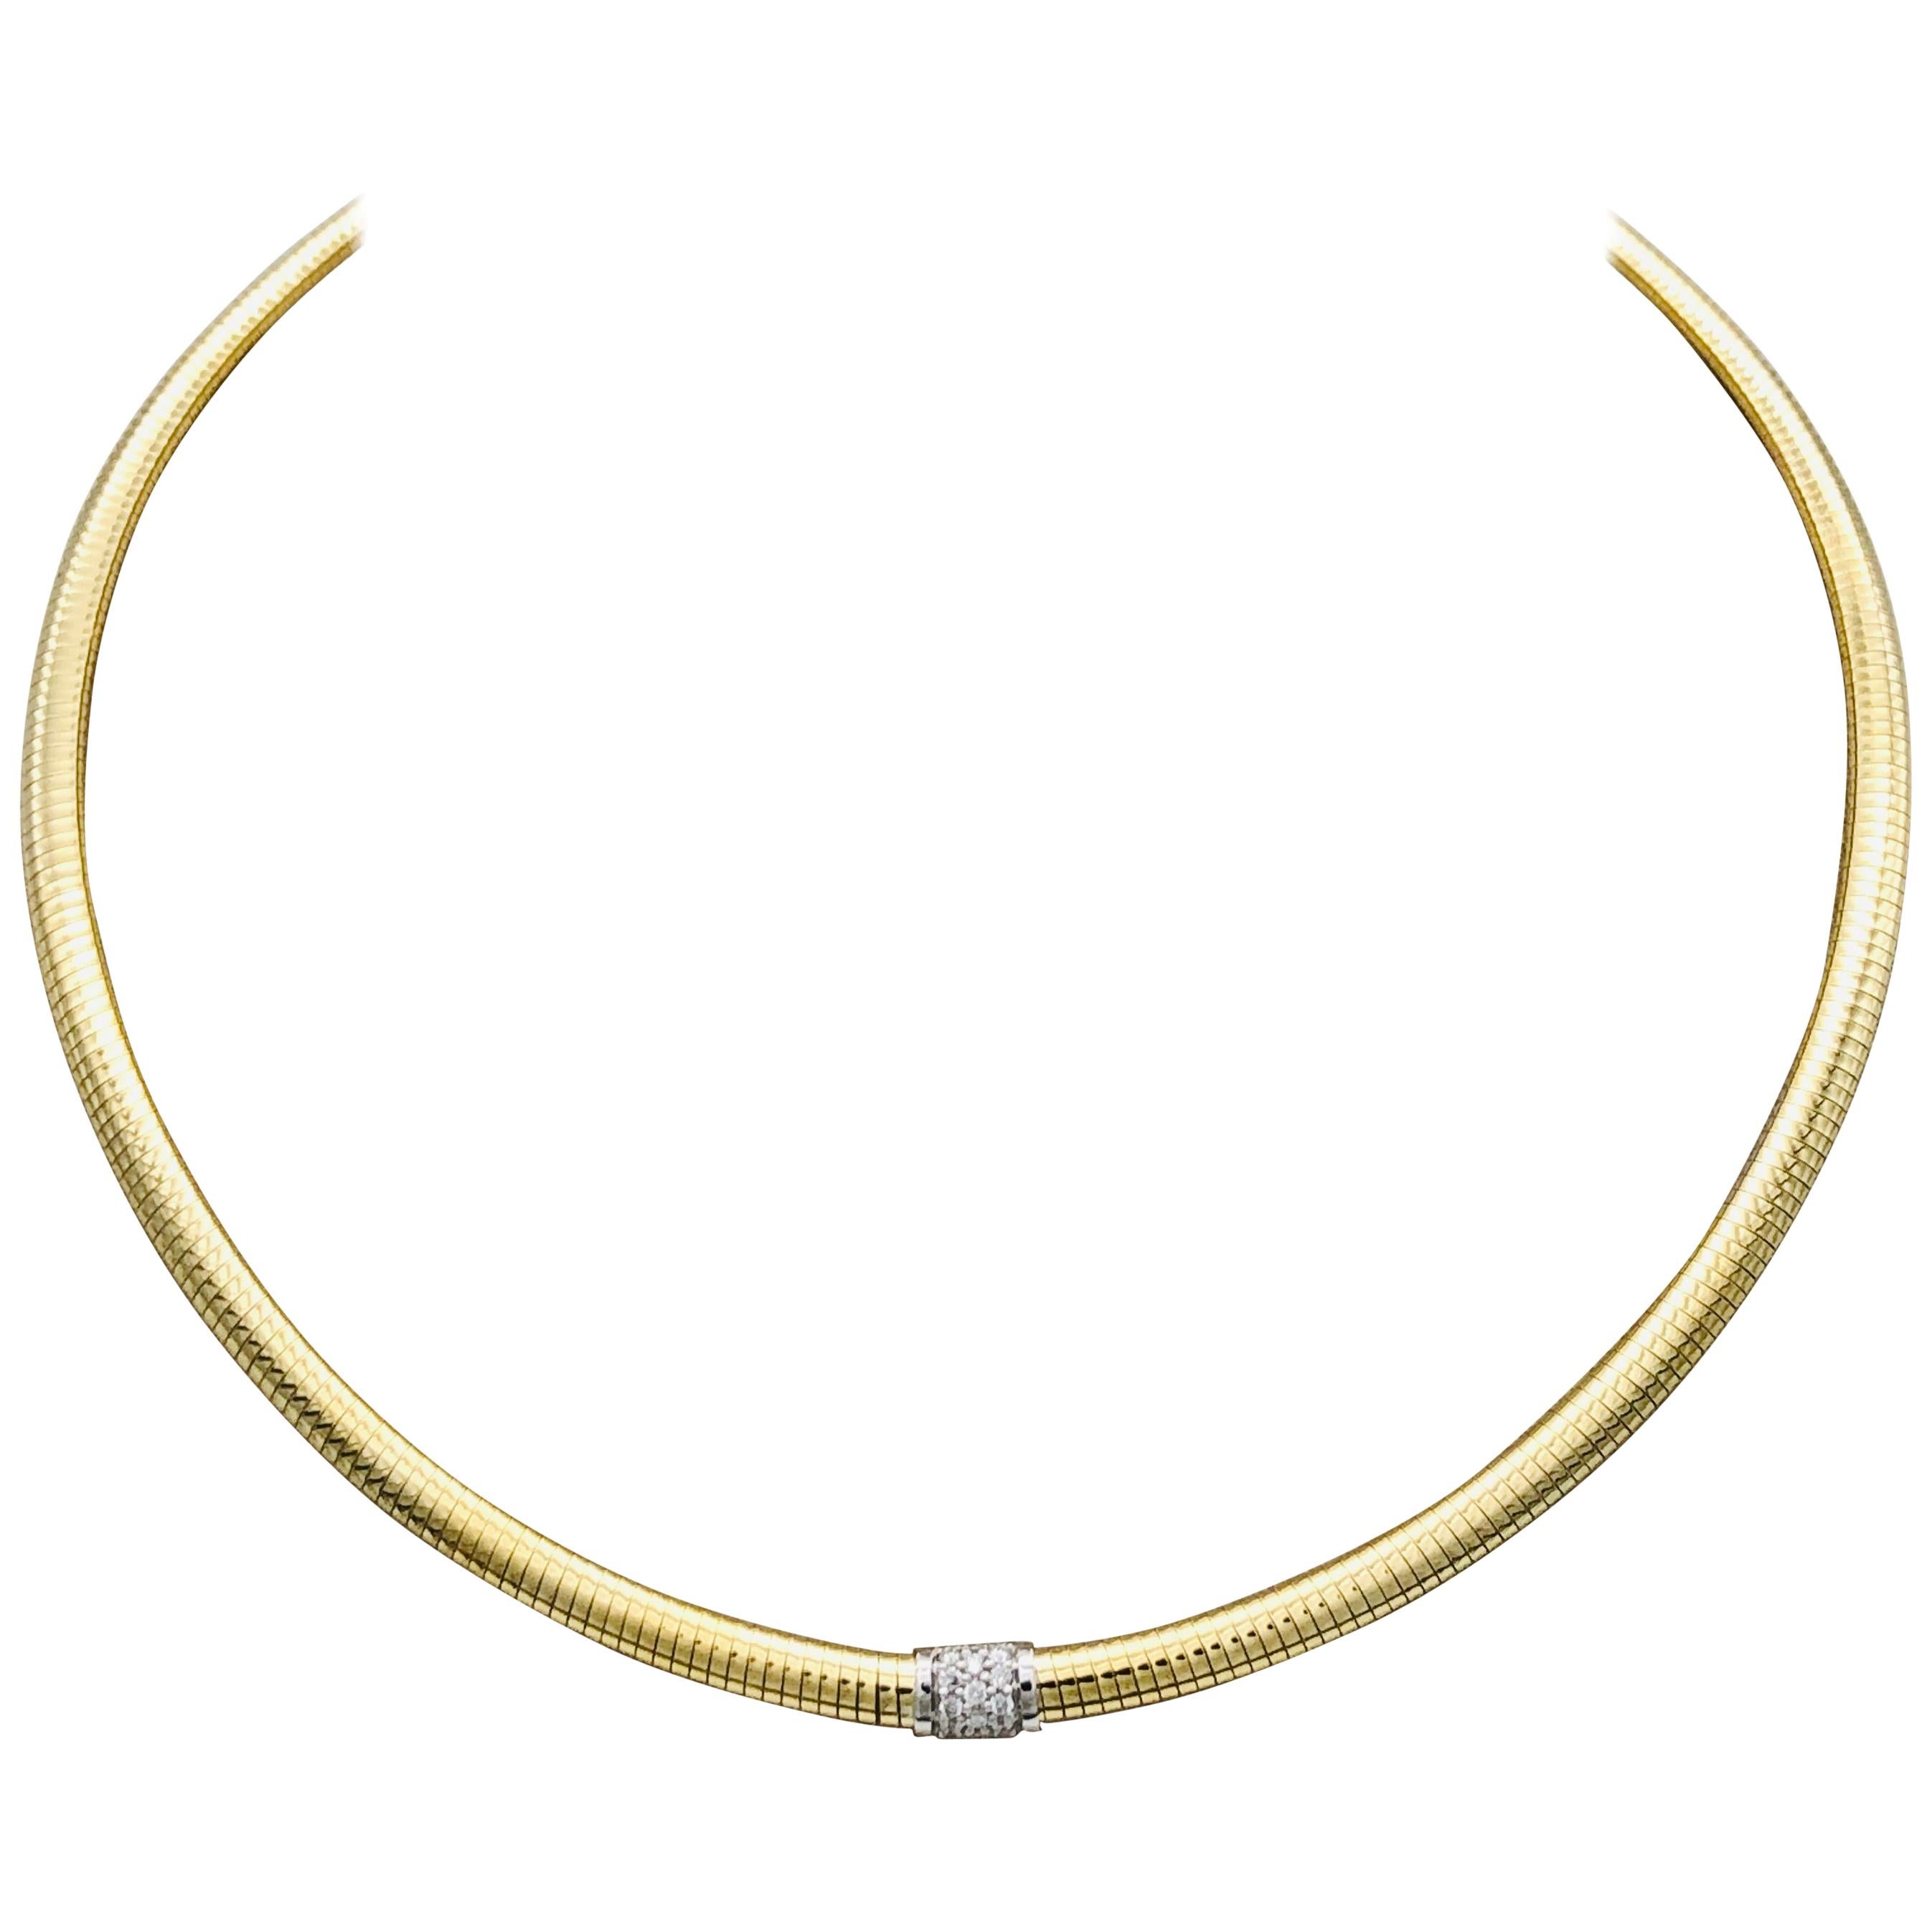 Yellow Gold 18 k Choker Neacklace and Diamonds Brillant Cut 
White Diamonds Brillant Cut : 0.15
Weigth Of Gold  18 kt gold,25,40 Grams 
Security Claps 
Tubogas processing and natural diamond pavé for jewels with important volumes and contemporary